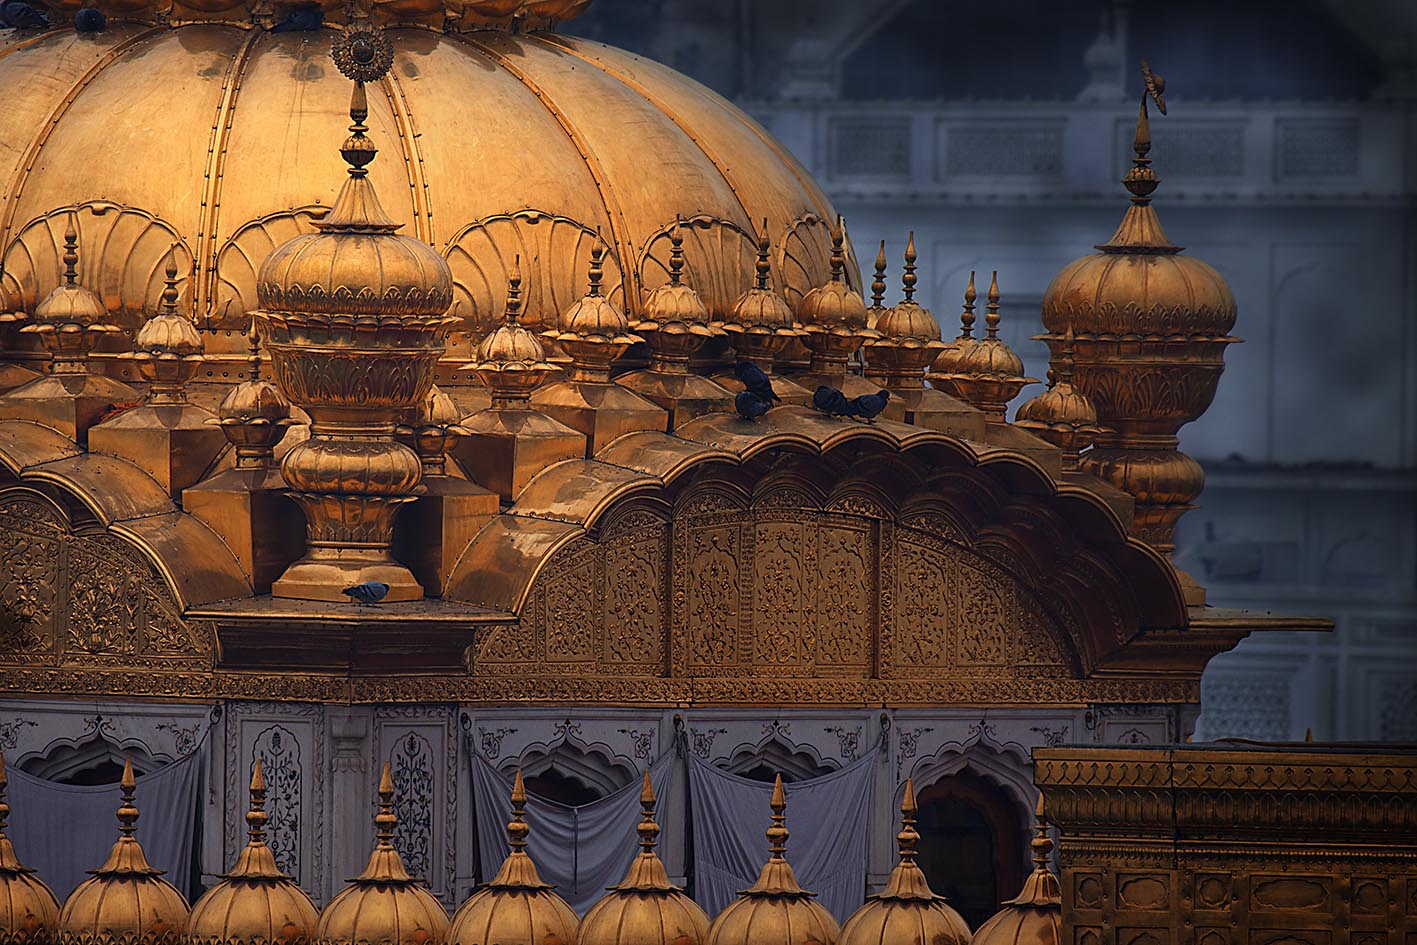 Domes of Golden Temple, Amritsar, India